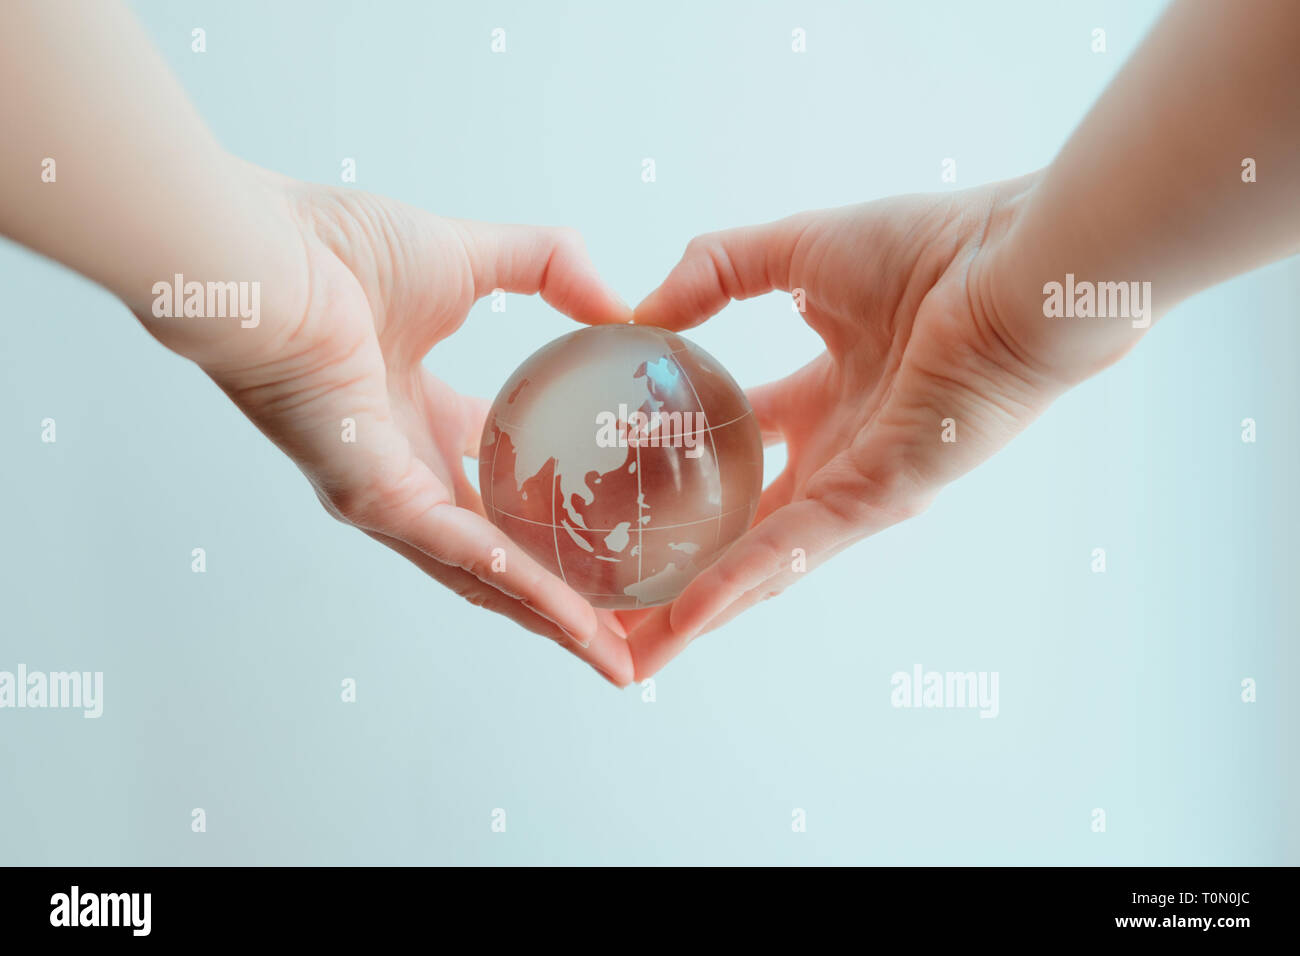 Two hands in shape of a heart holding a glass globe of Indoneasia and Phillipine sea Stock Photo